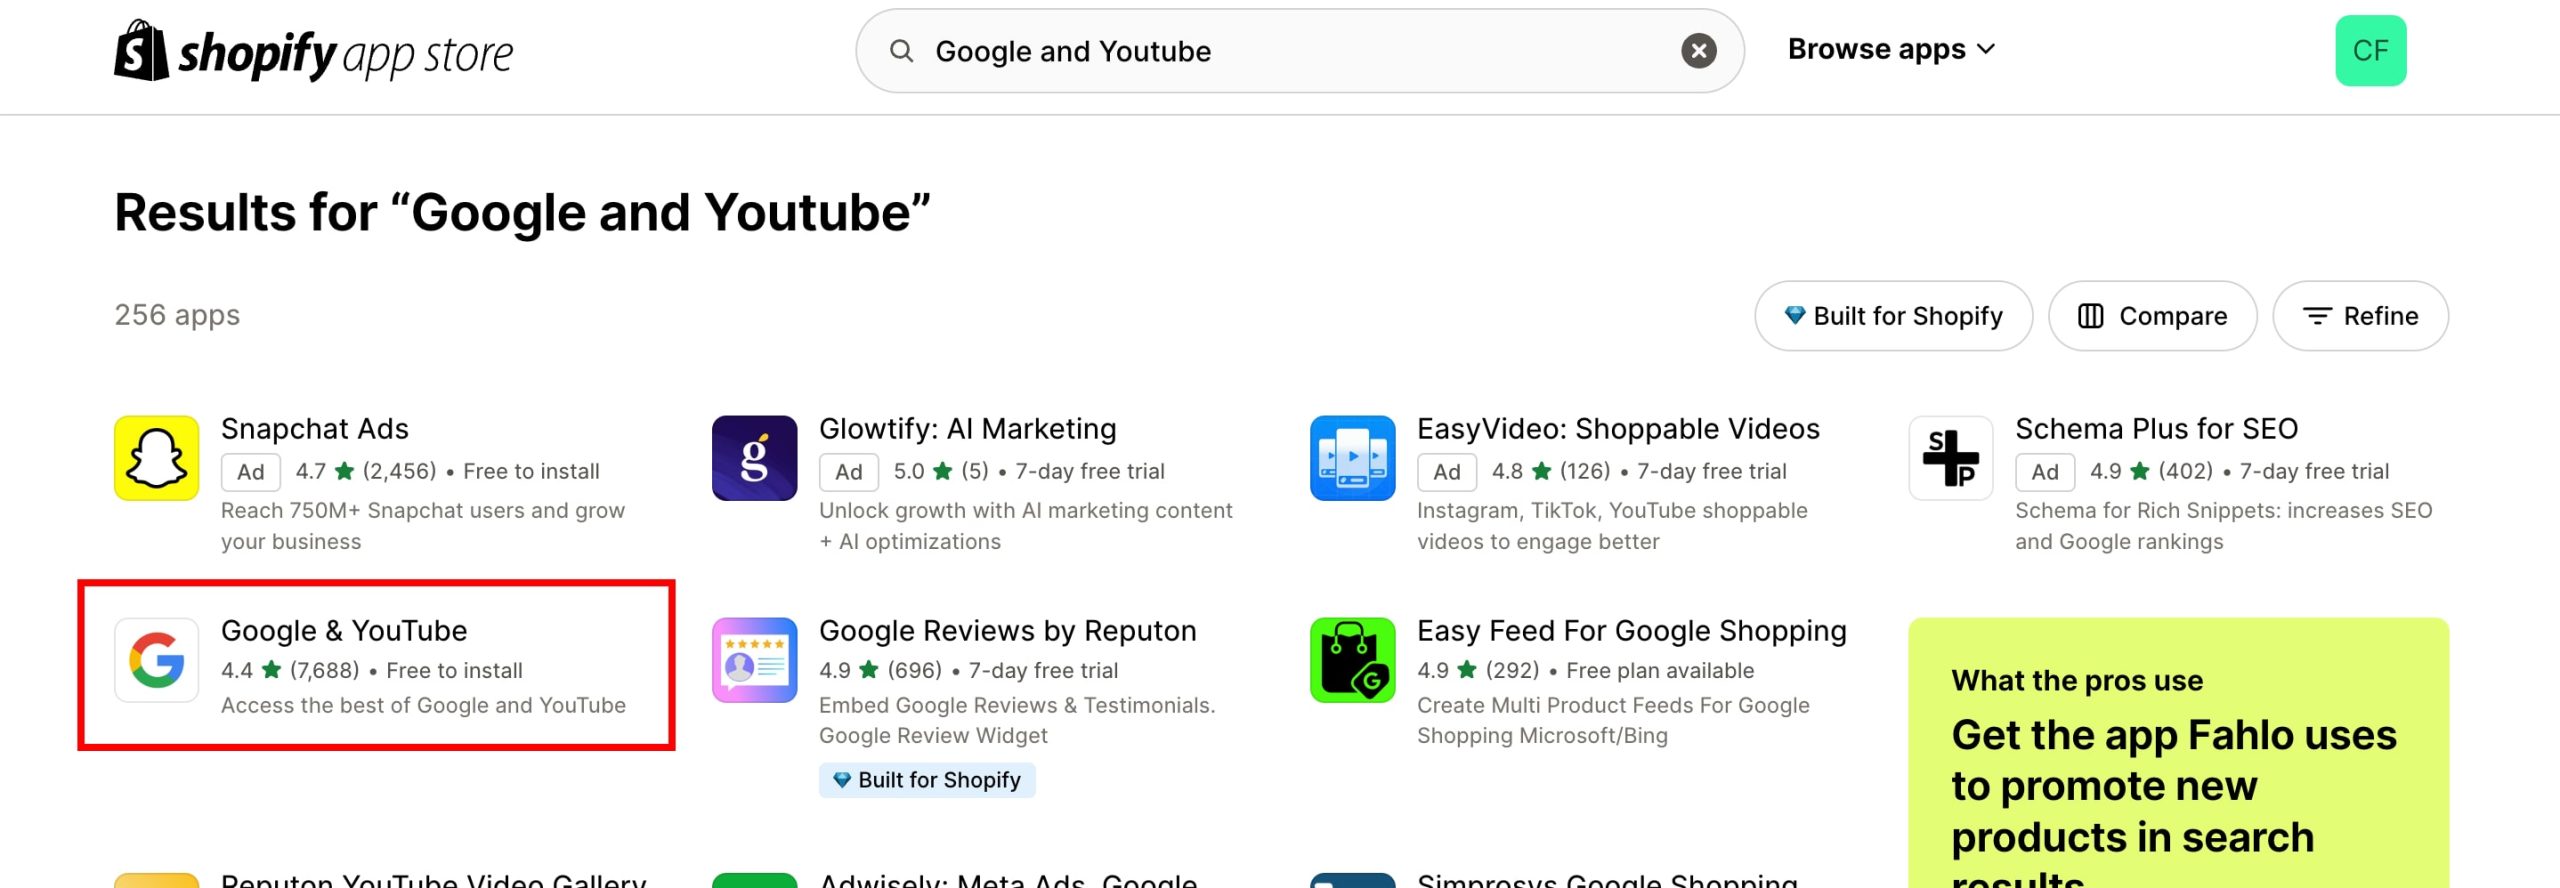 shopify app store google and youtube app